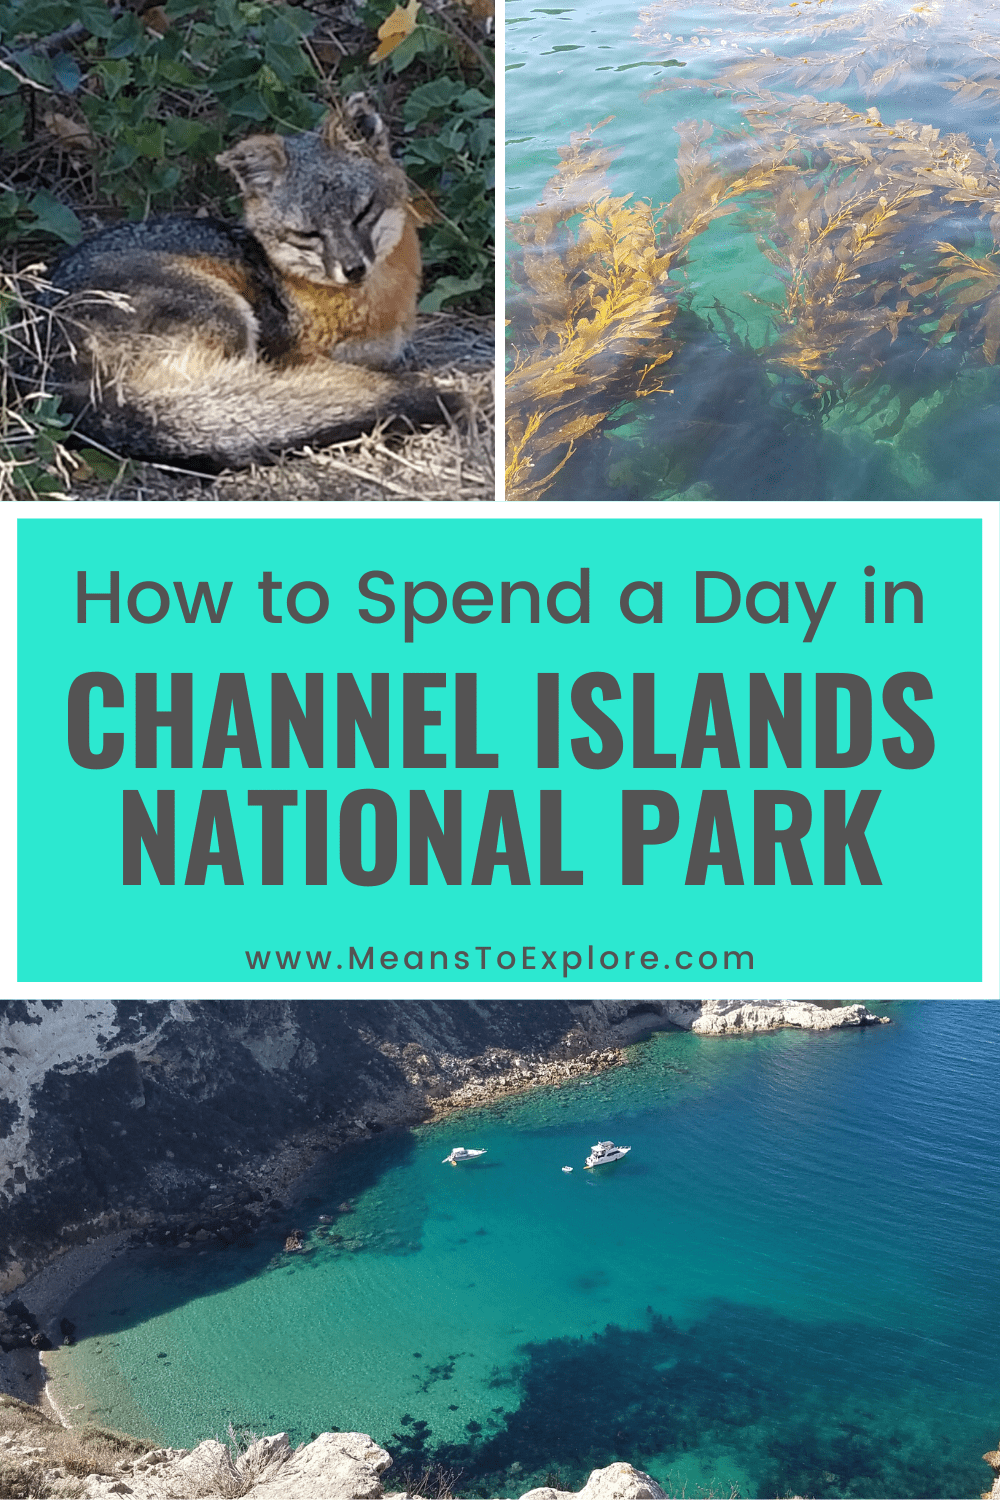 How to Spend a Peaceful Day in Channel Islands National Park